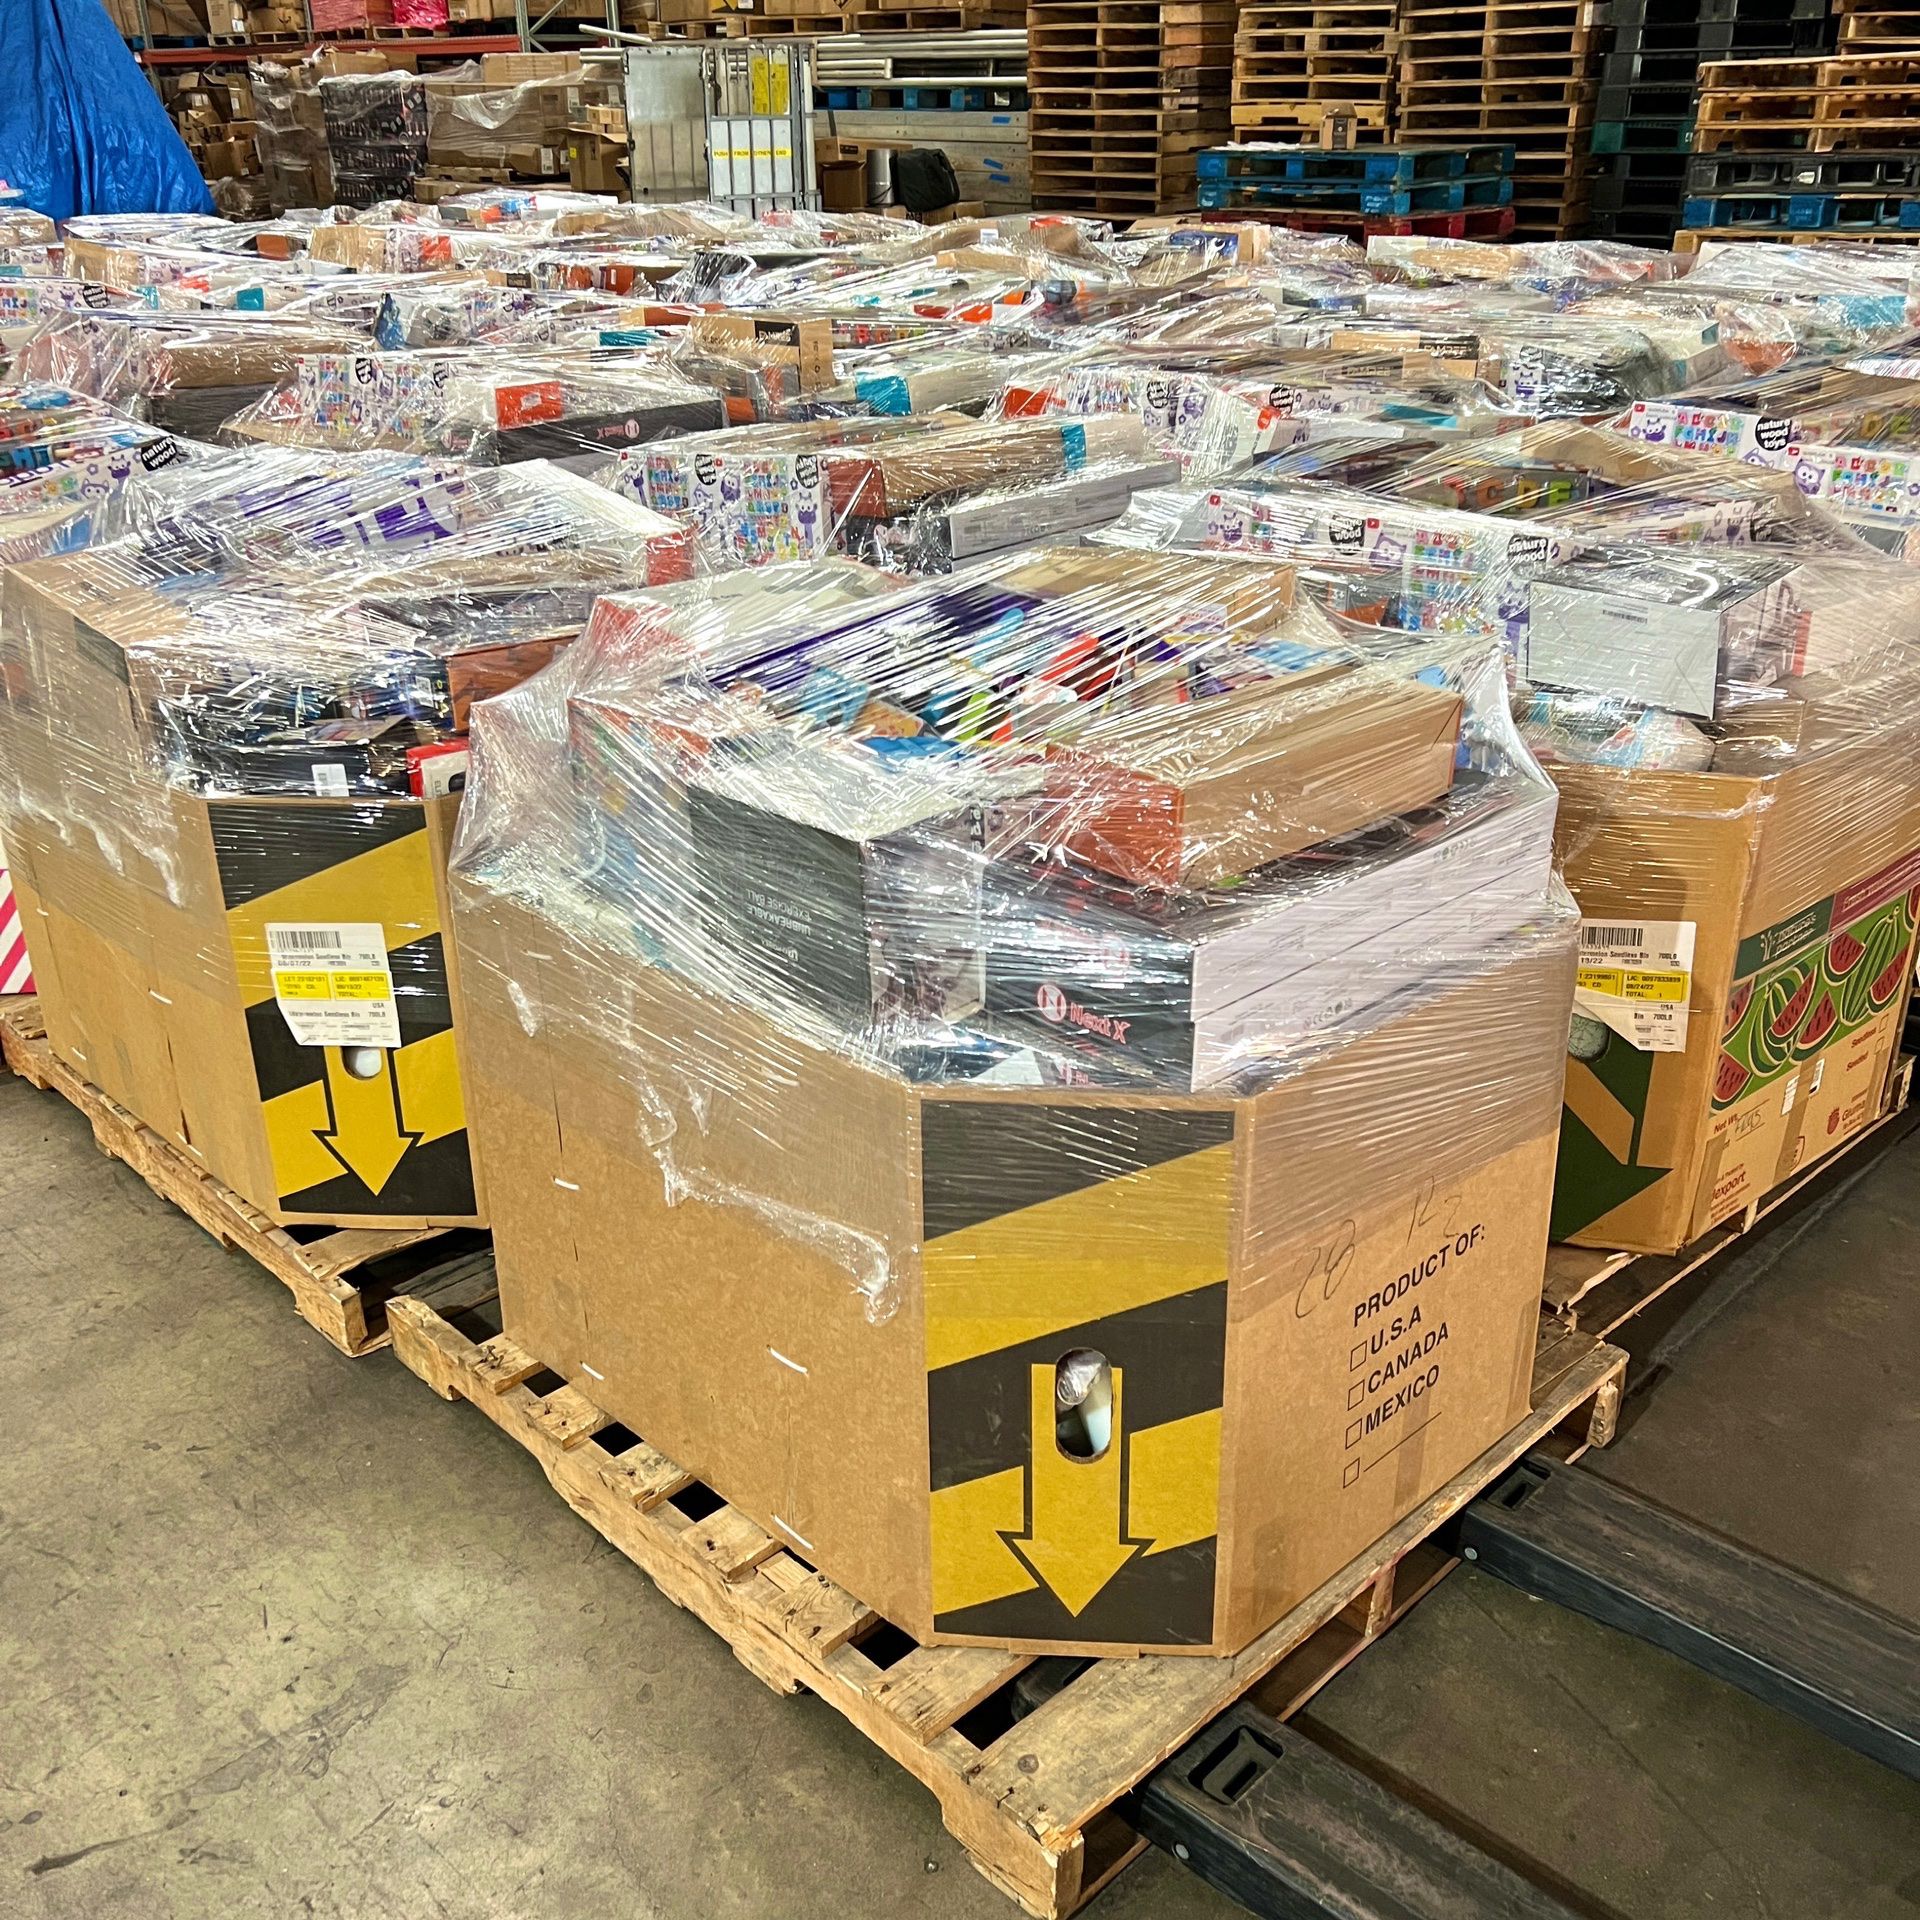 ❗️LIQUIDATION BINS / PALLETS❗️MIXED ITEM PALLETS❗️Toys, Electronics, Household Items ❗️OVERSTOCK CLEARANCE SALE ($300 To $400)